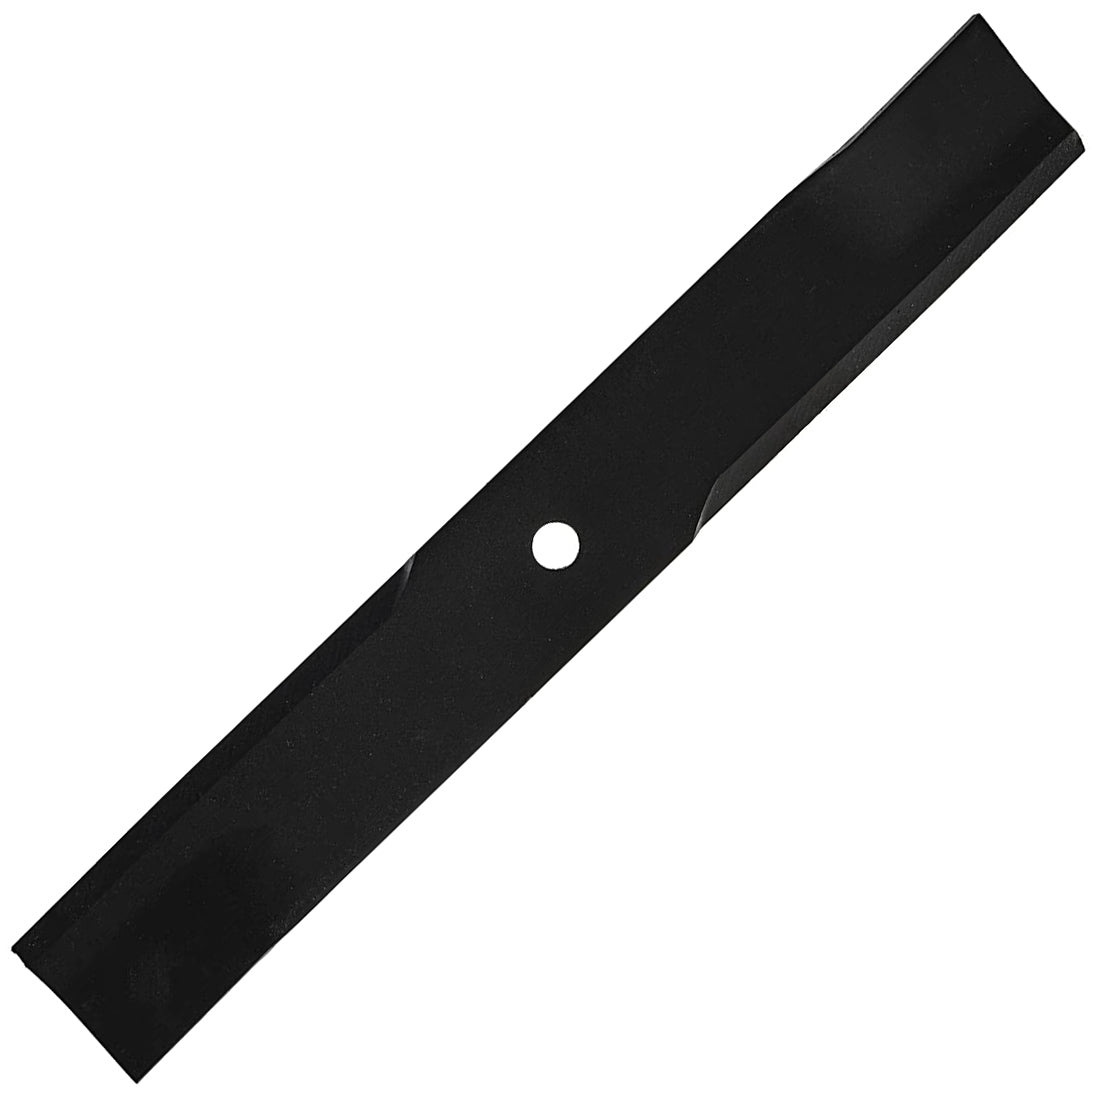 Exmark 103-6580-S Low Lift Blade for 52 in. Deck